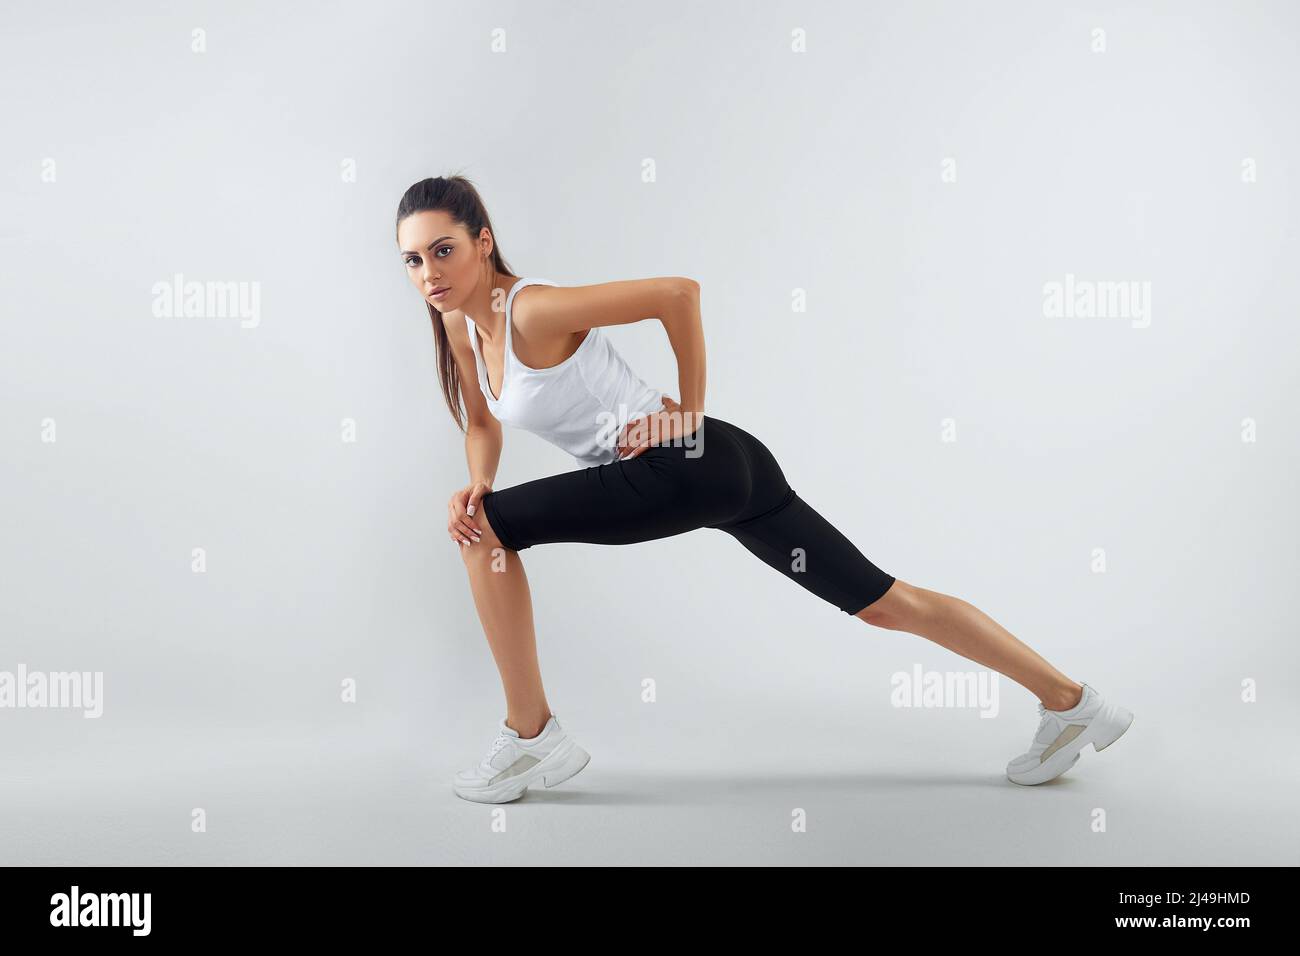 Fit woman stretching her leg to warm up - isolated over background Stock Photo